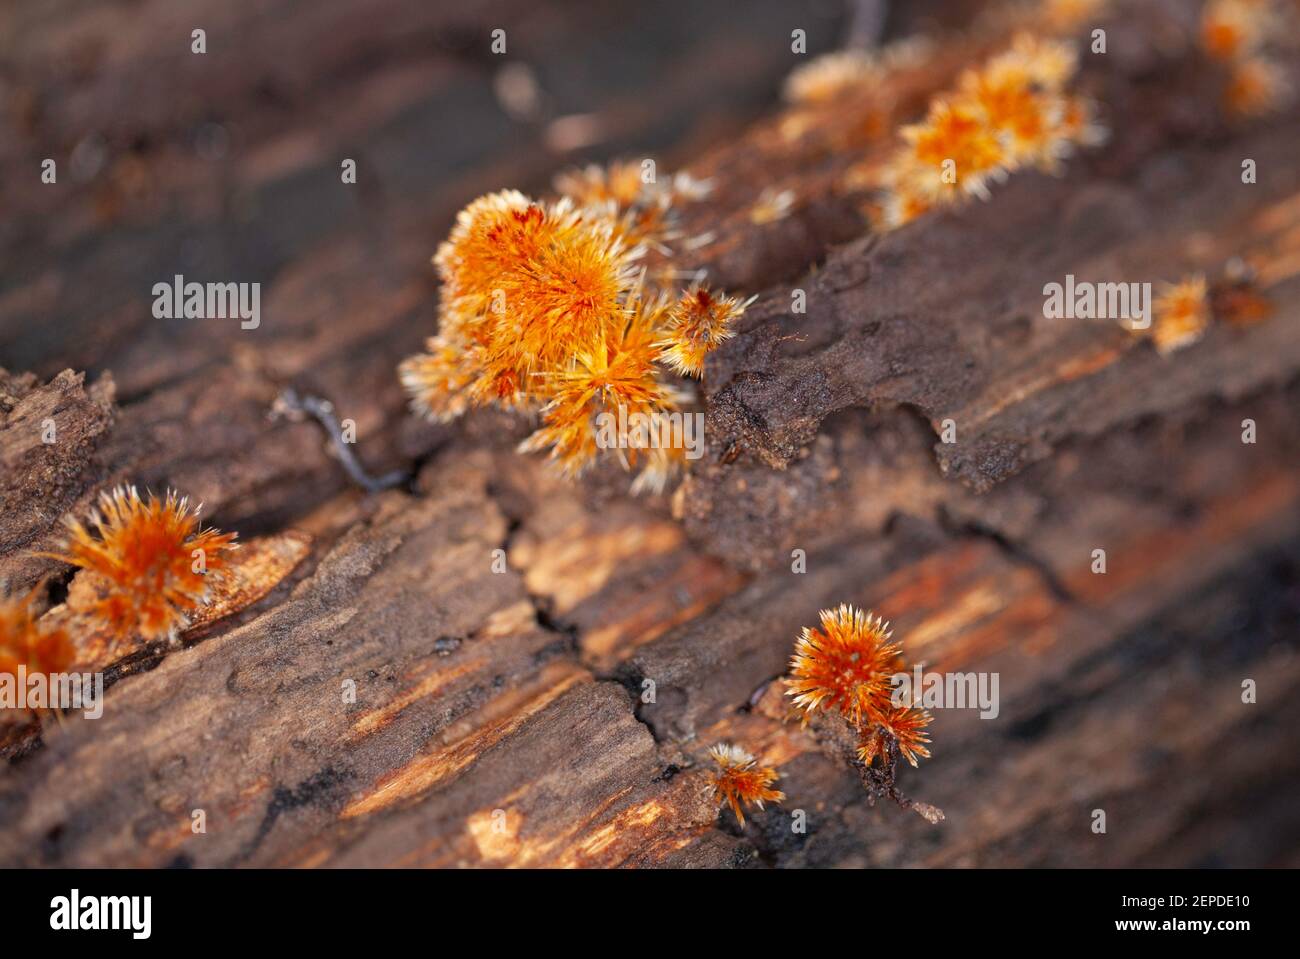 Close up macro shot of an orange fungus with spines, resembling moss, on a dead tree trunk in the forest. Minimal focus. Stock Photo